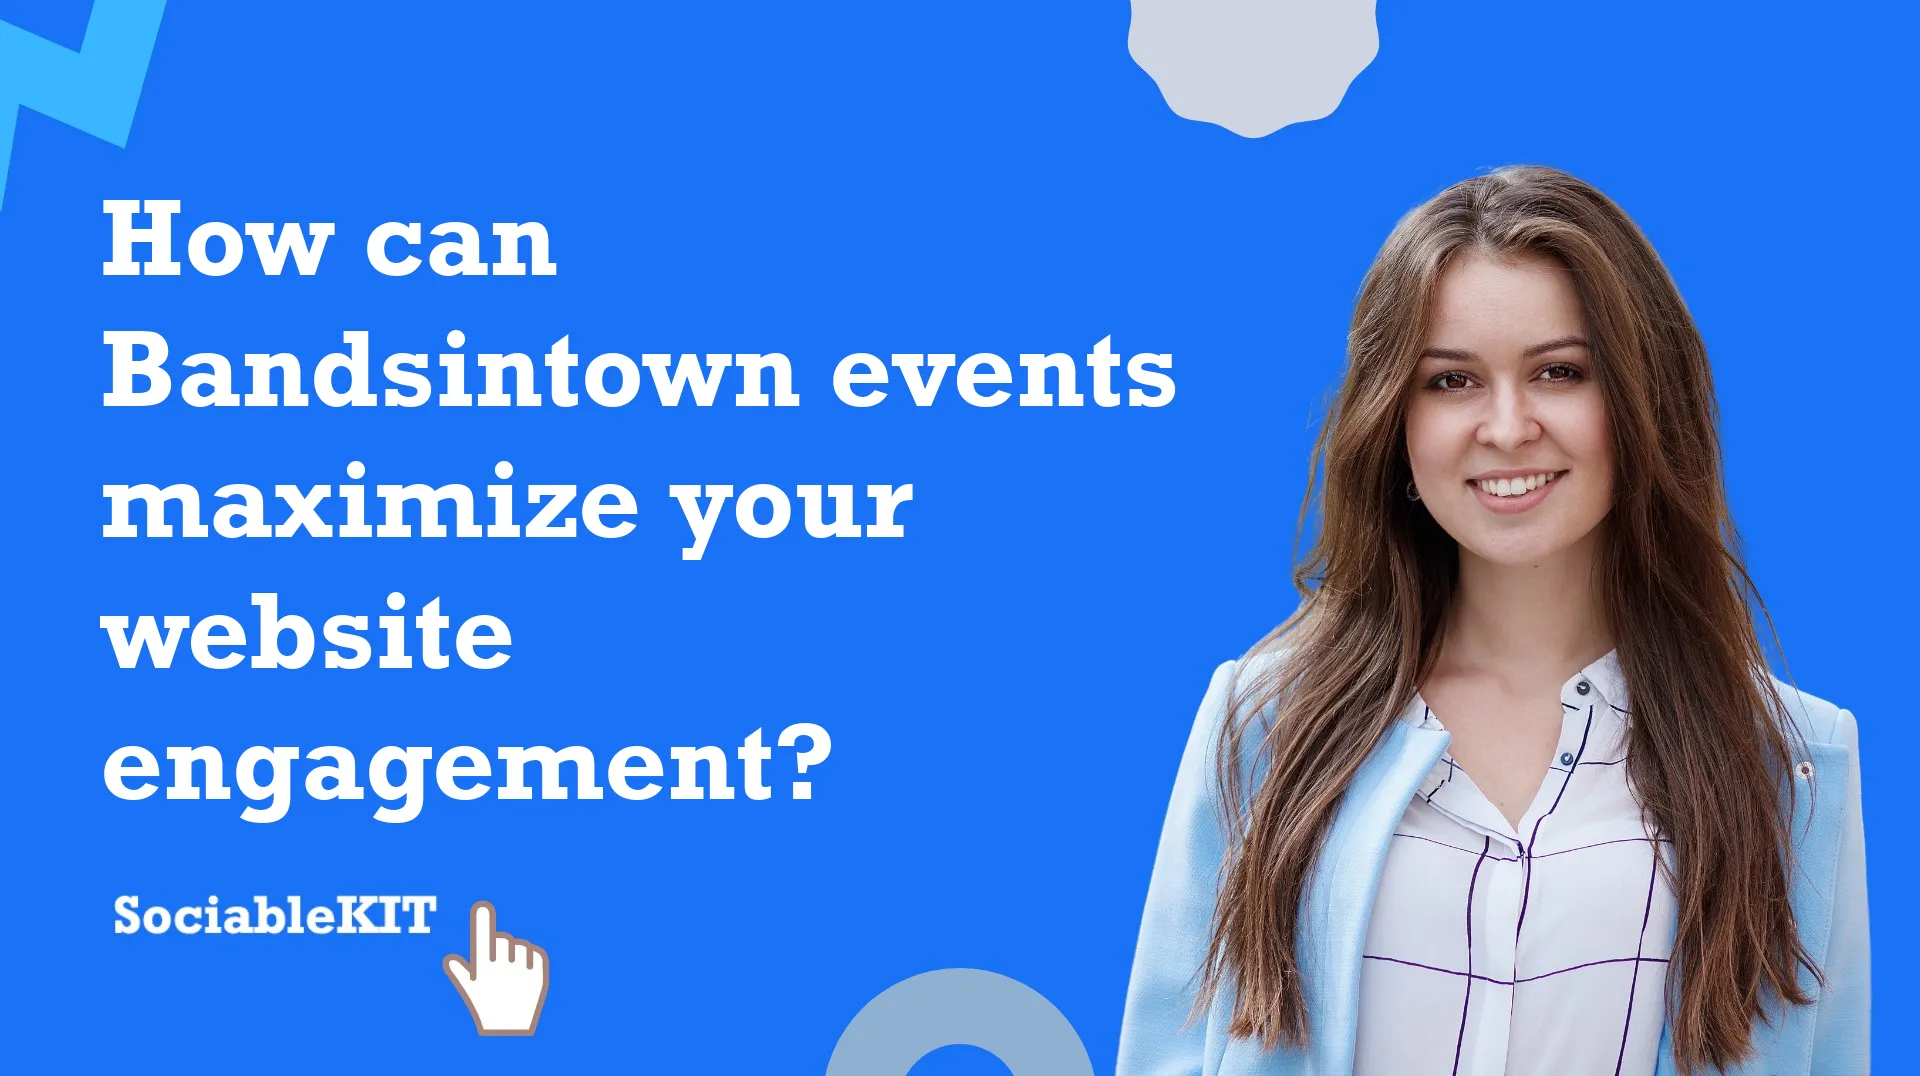 How can Bandsintown events maximize your website engagement?